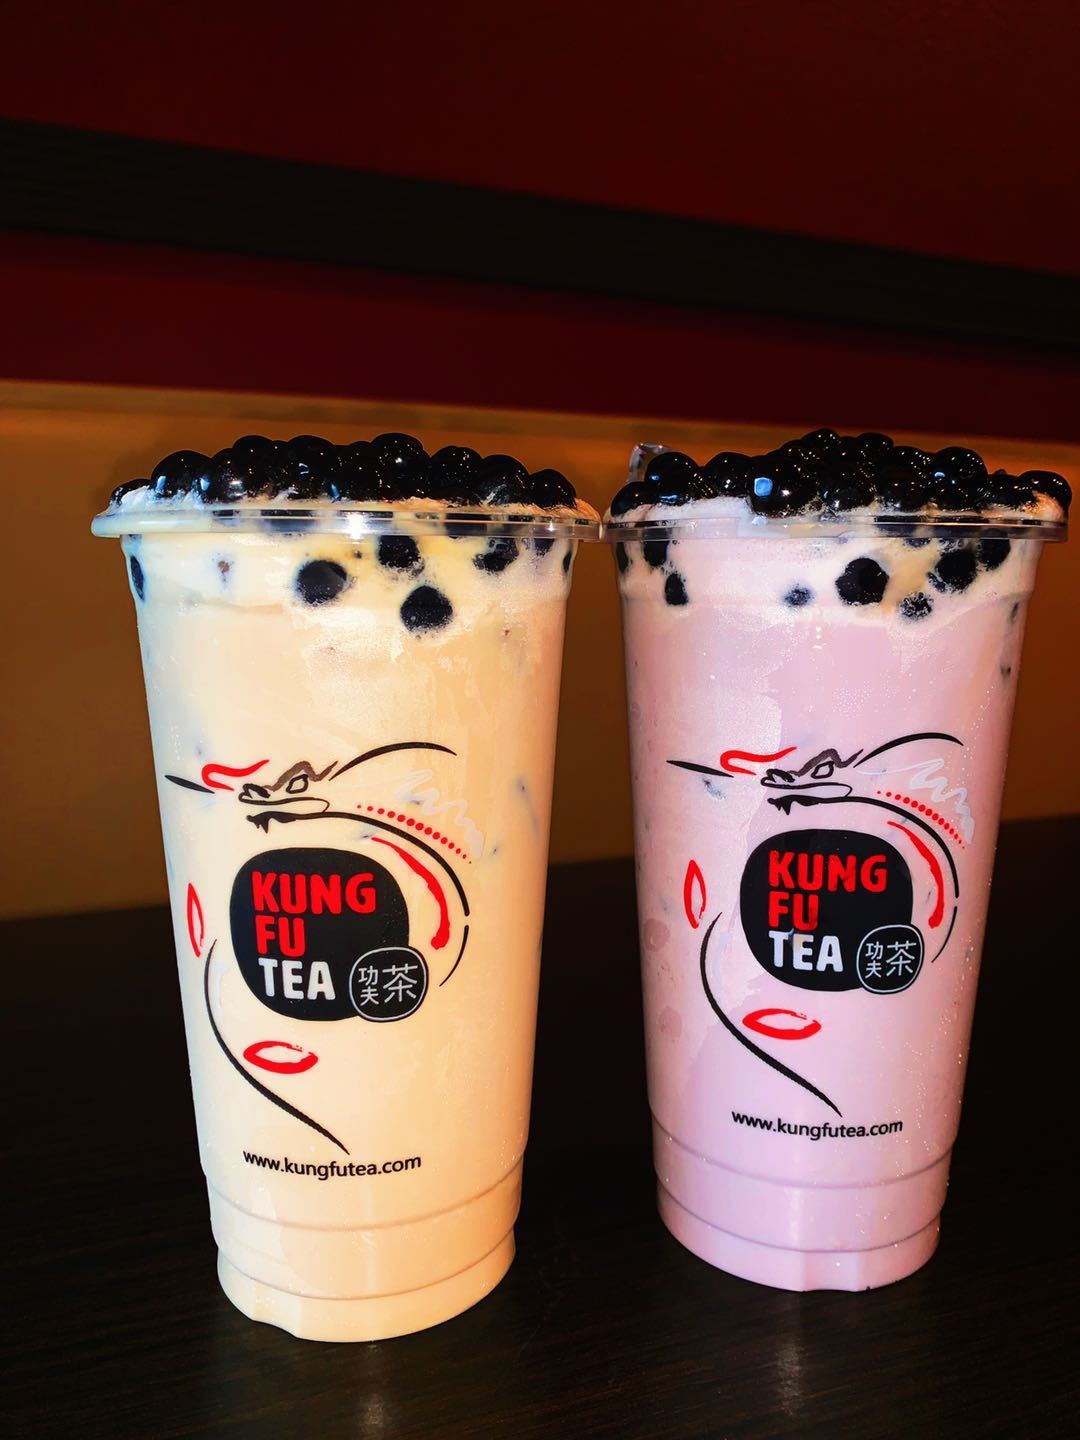 Kung Fu Tea, which started in Taiwan, offers more than 40 kinds of teas. Bubble teas, made with tapioca pearls called bobas, are popular in Taiwan and throughout Asia. Courtesy photo.